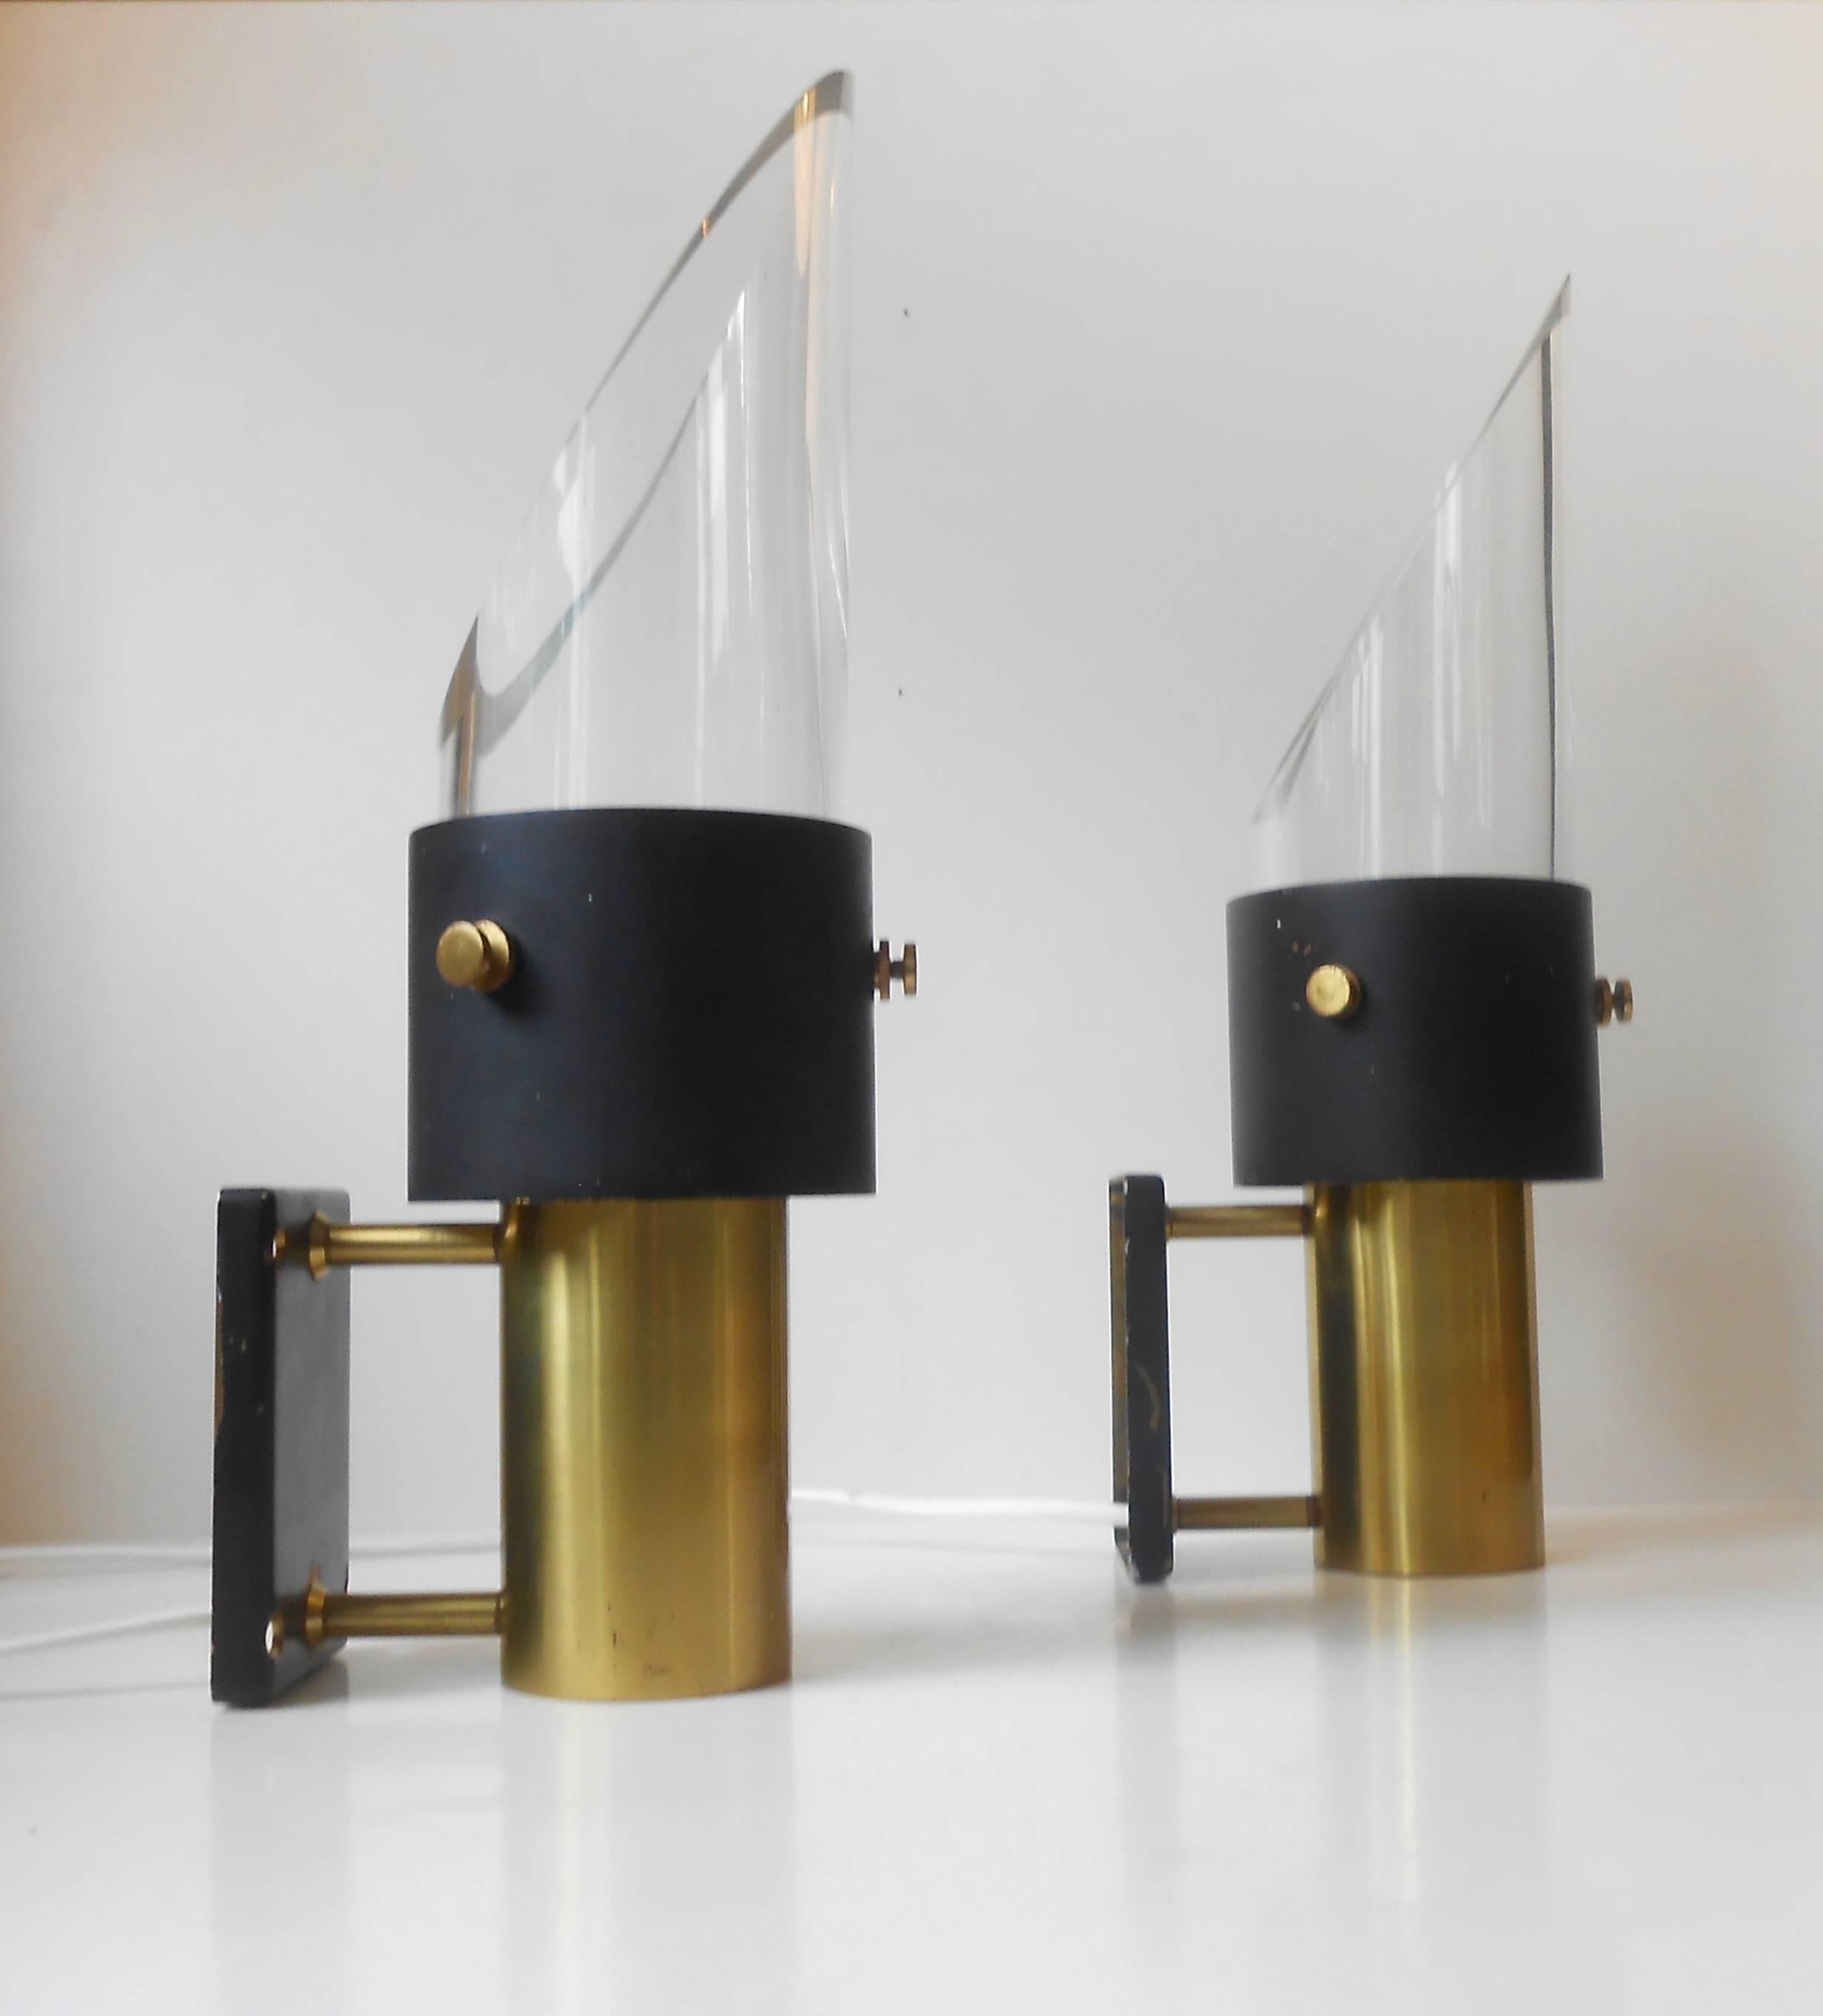 Constructed of partially painted solid brass and thick tubular Orrefors crystal, these wall lights demands attention. They were manufactured in a very limited quantity by Lyfa, Denmark in collaboration with Swedish Orrefors. The model is called